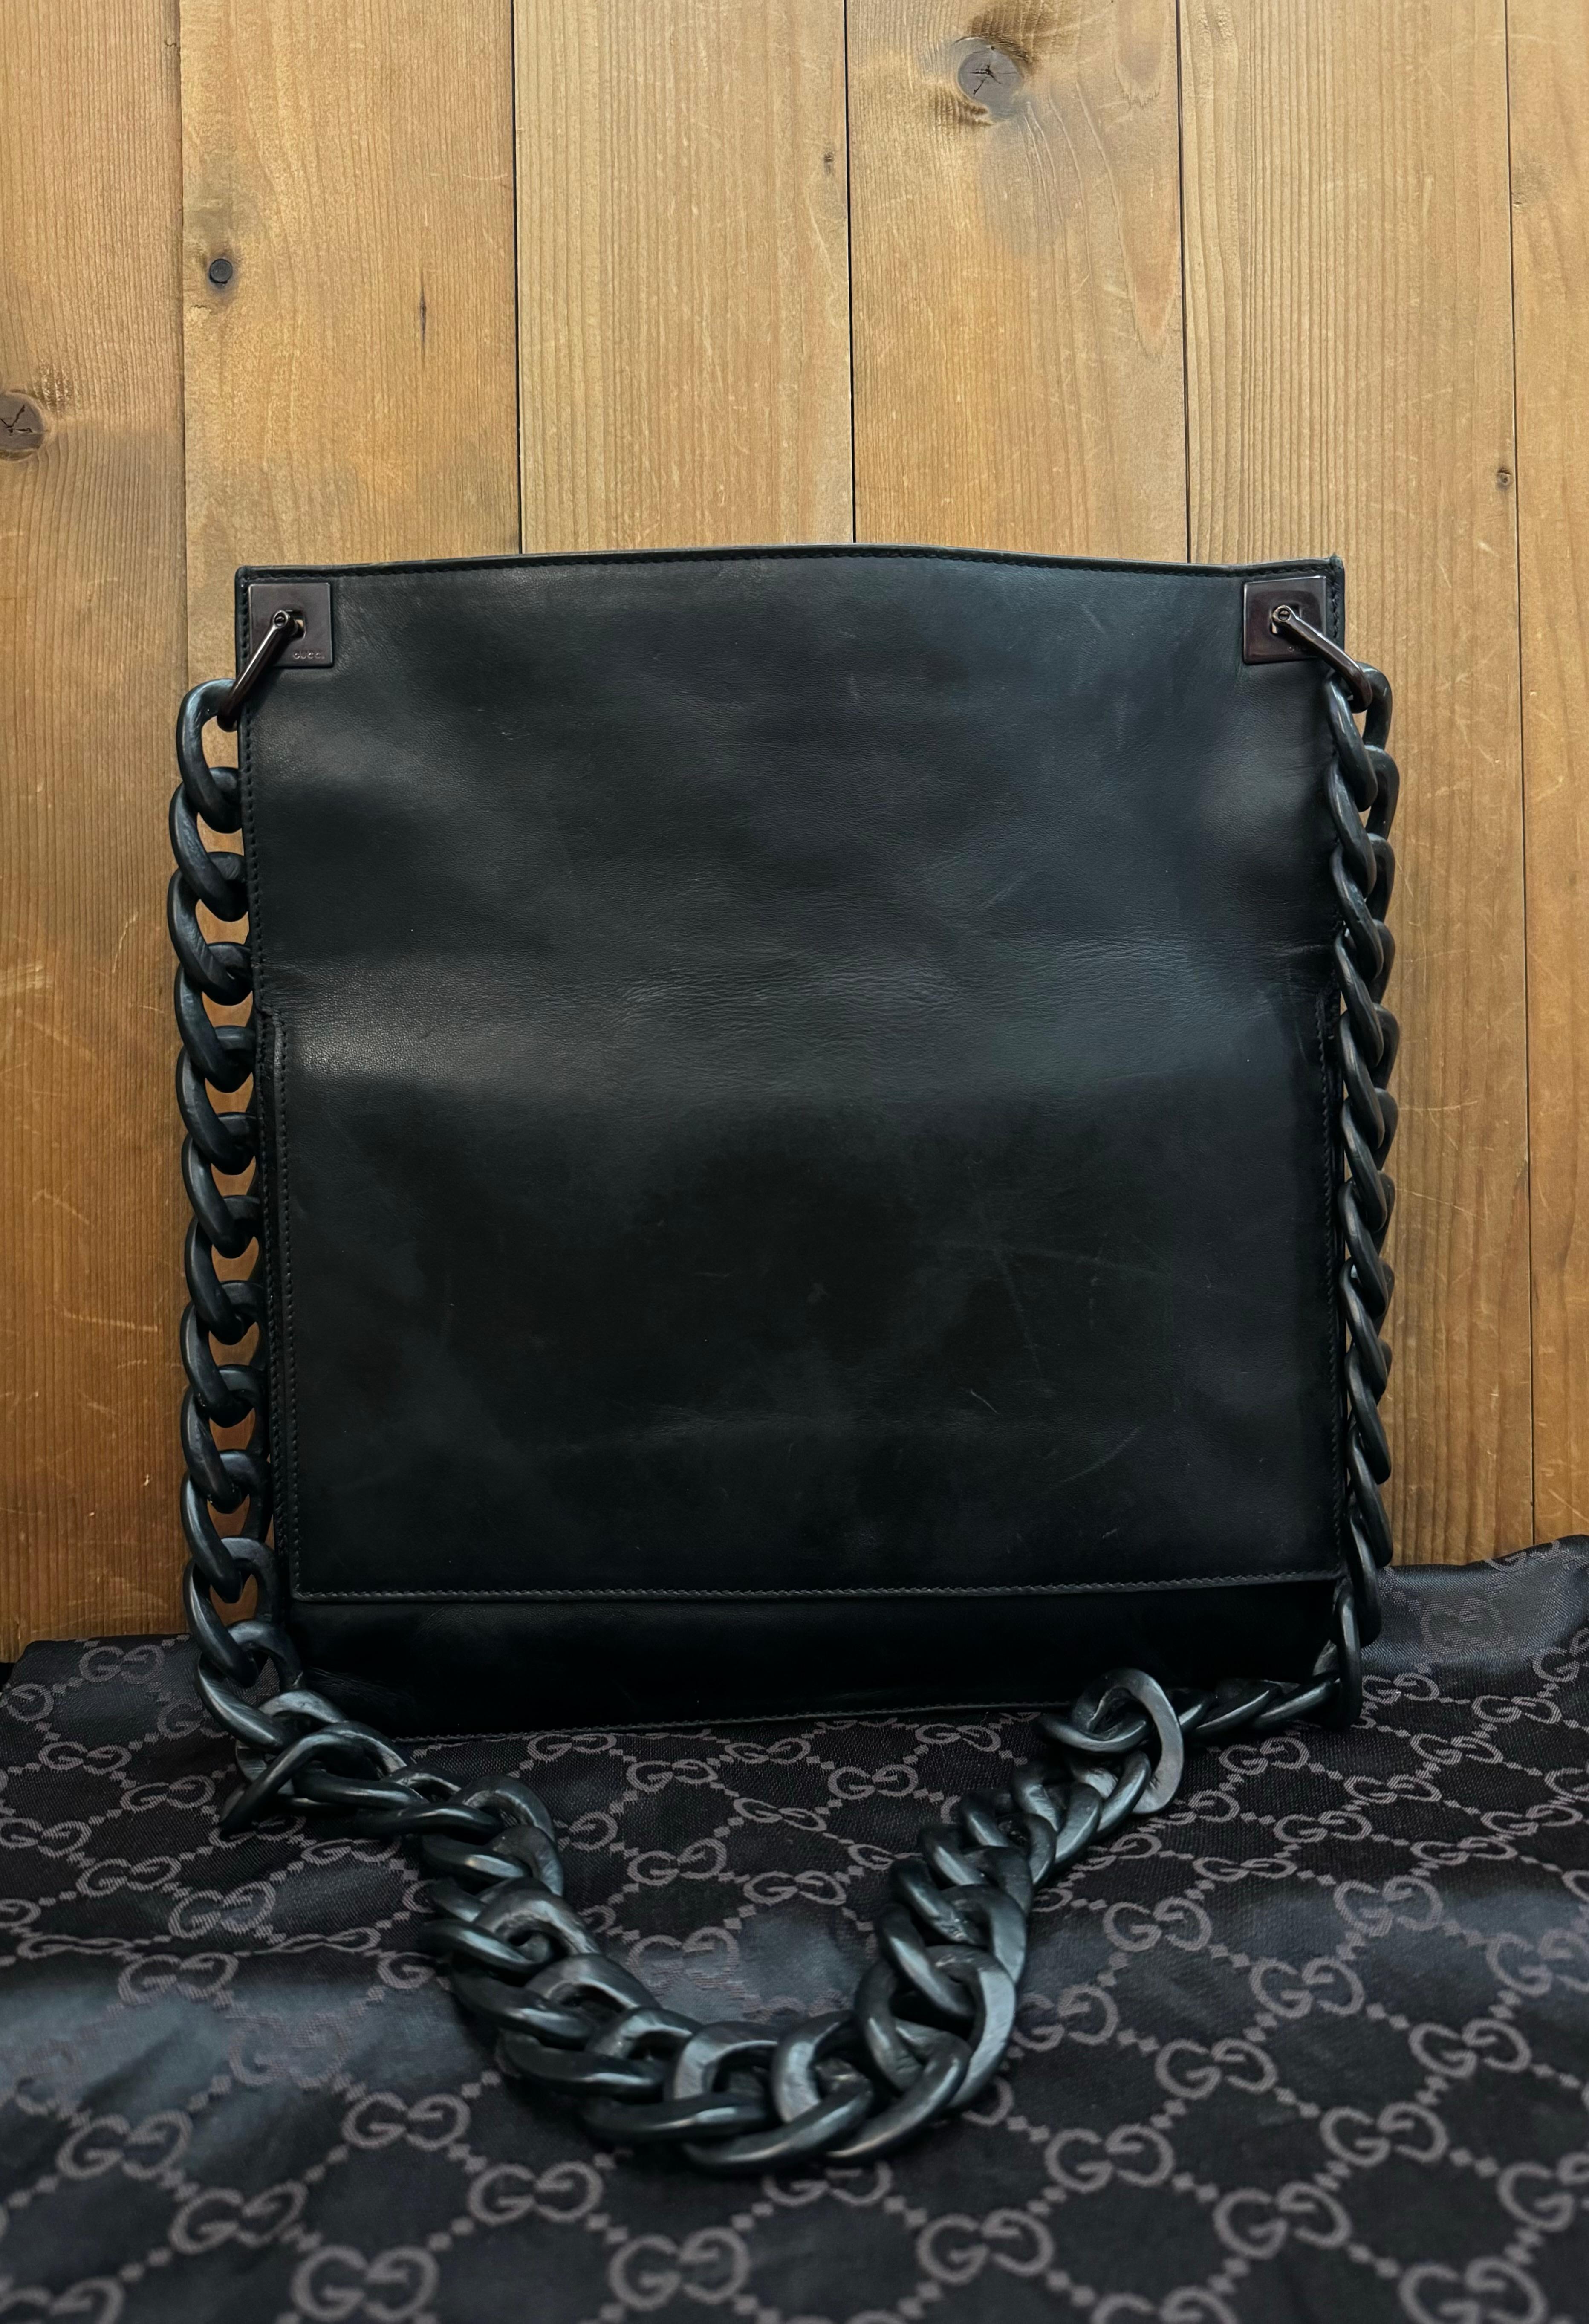 This vintage GUCCI flat messenger bag is crafted of smooth calfskin leather in black featuring a wooden chain. Top opens to the main compartment lined with suede leather featuring a patch pocket. The front features a flap pocket with magnetic snap